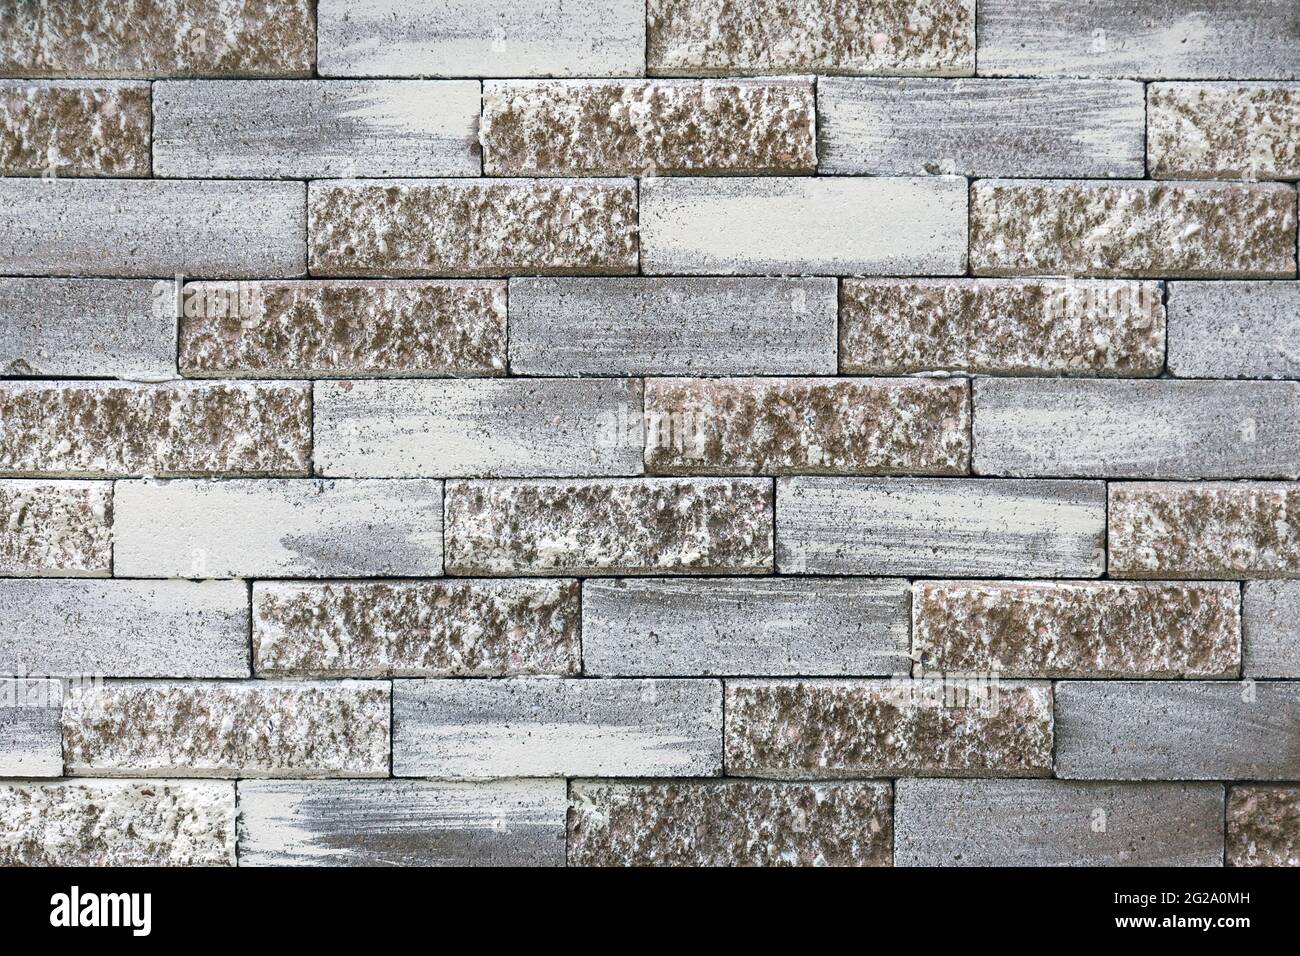 Pastel brick wall. Grey and light brown masonry pattern. Cement block painted texture, grunge architectural element. Abstract backdrop. Building's Stock Photo